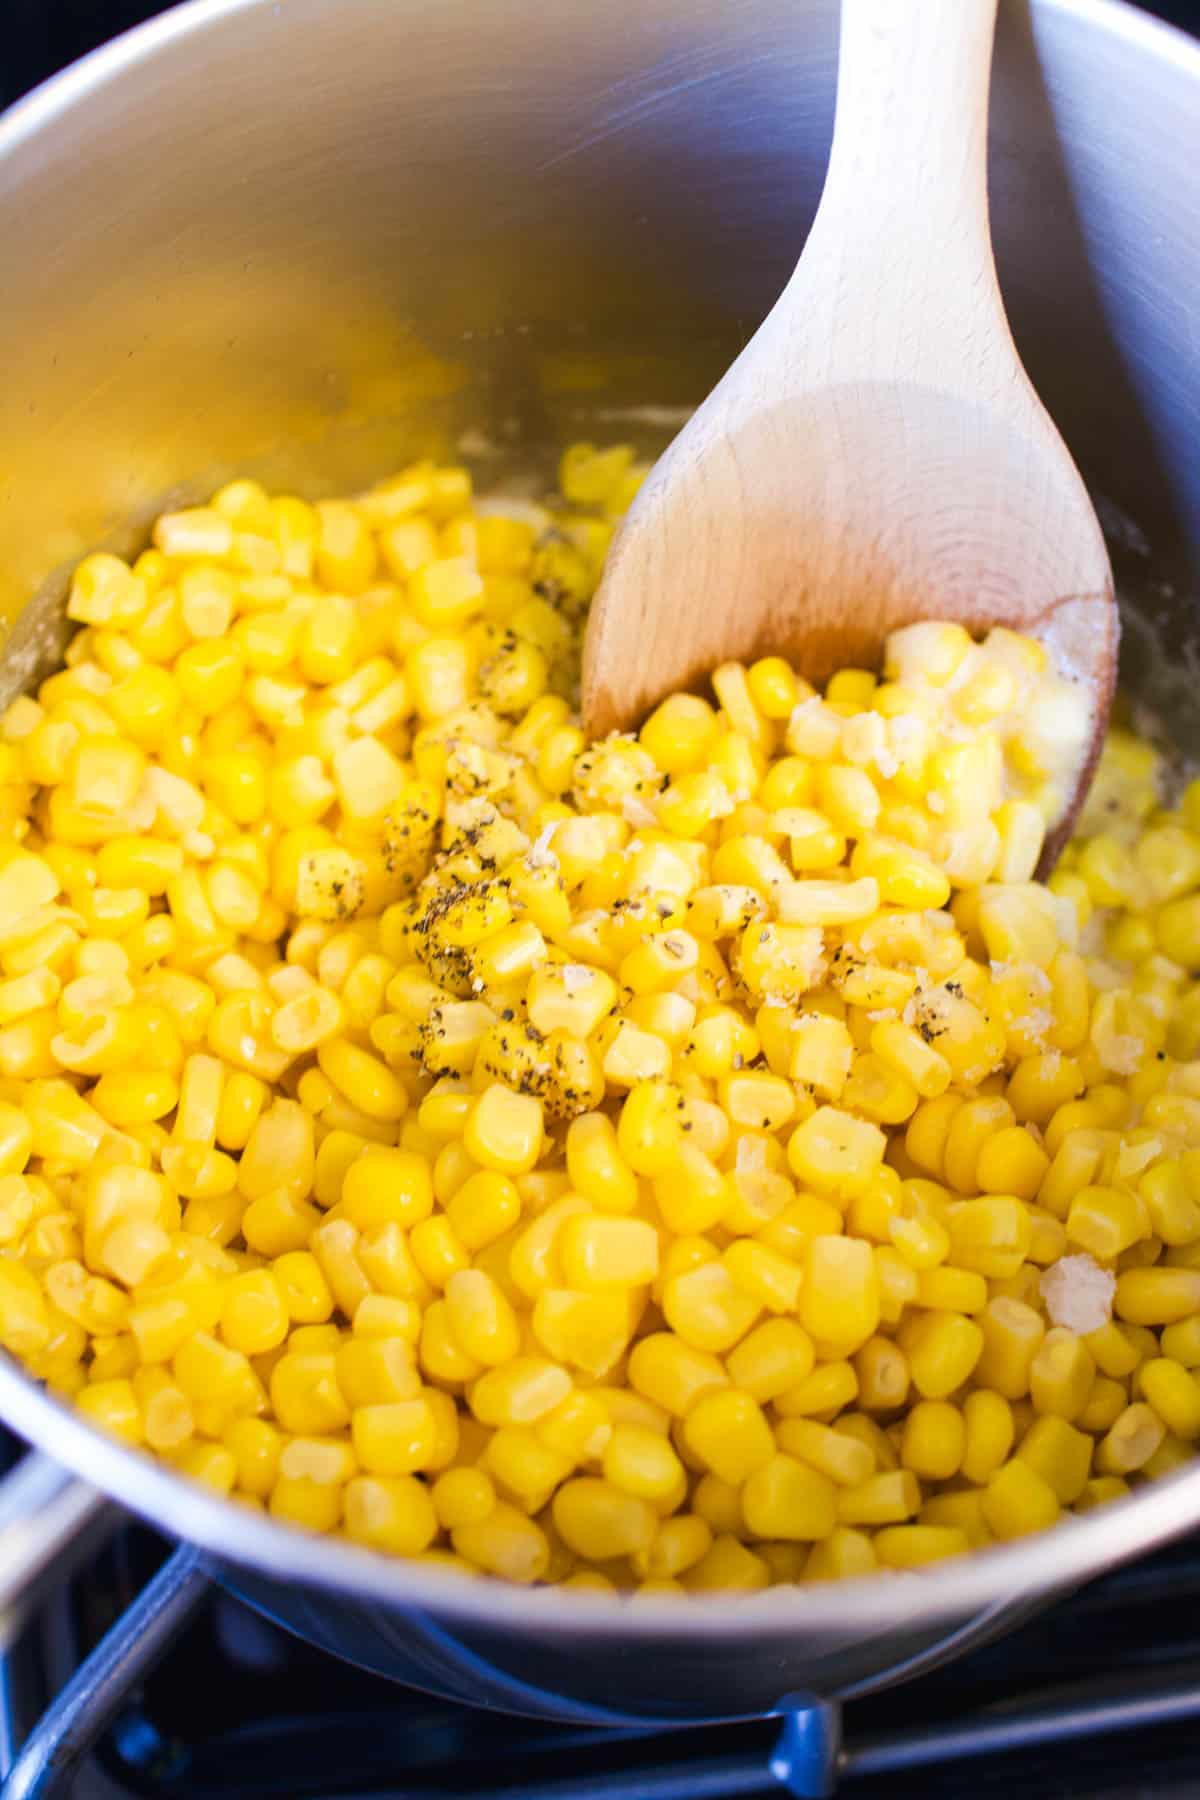 Corn in a saucepan with salt and pepper and a wooden spoon.